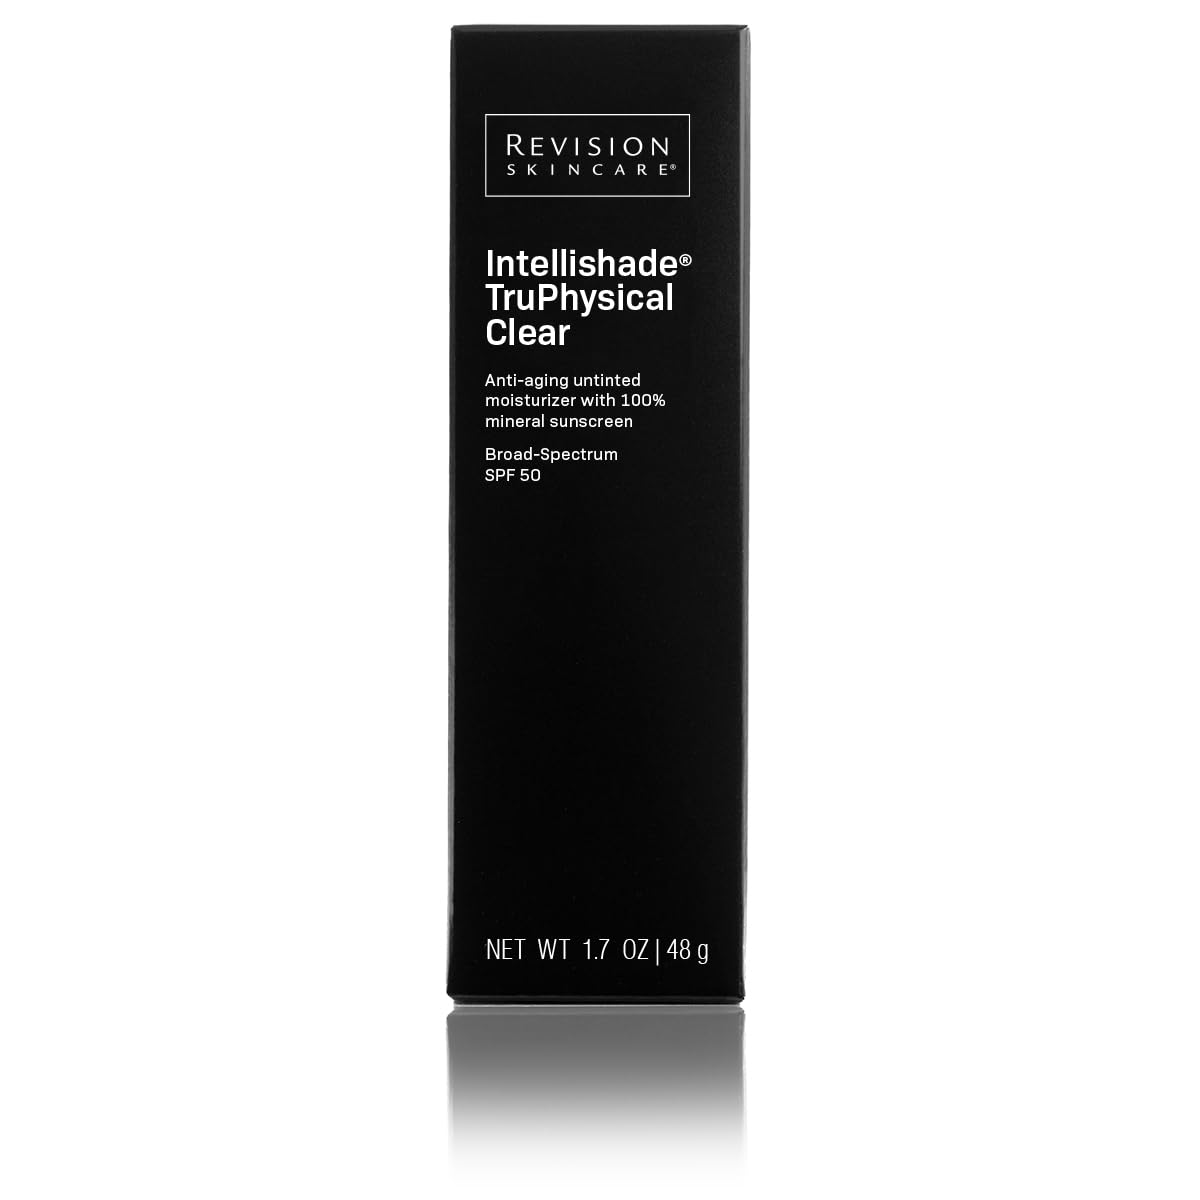 Intellishade® TruPhysical Clear, a sheer 100% all-mineral broad-spectrum SPF 50 anti-aging moisturizer that enhances your natural radiance without the white cast or shine, 1.7oz